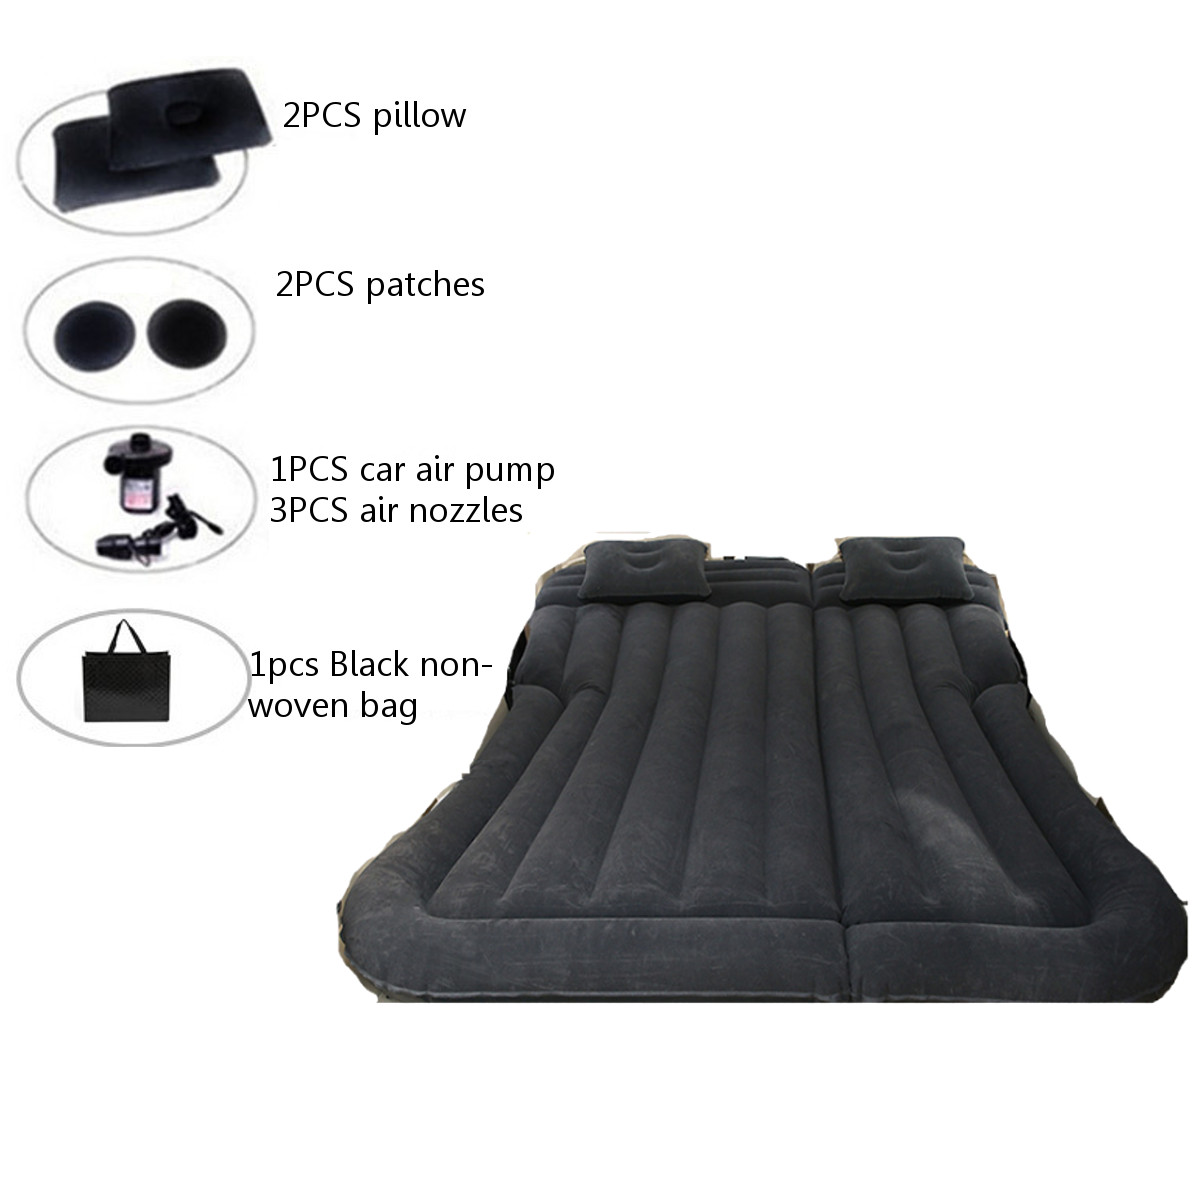 180x130cm-Multifunctional-Inflatable-Car-Air-Mattress-Durable-Back-Seat-Cover-Travel-Bed-Moisture-pr-1888970-9